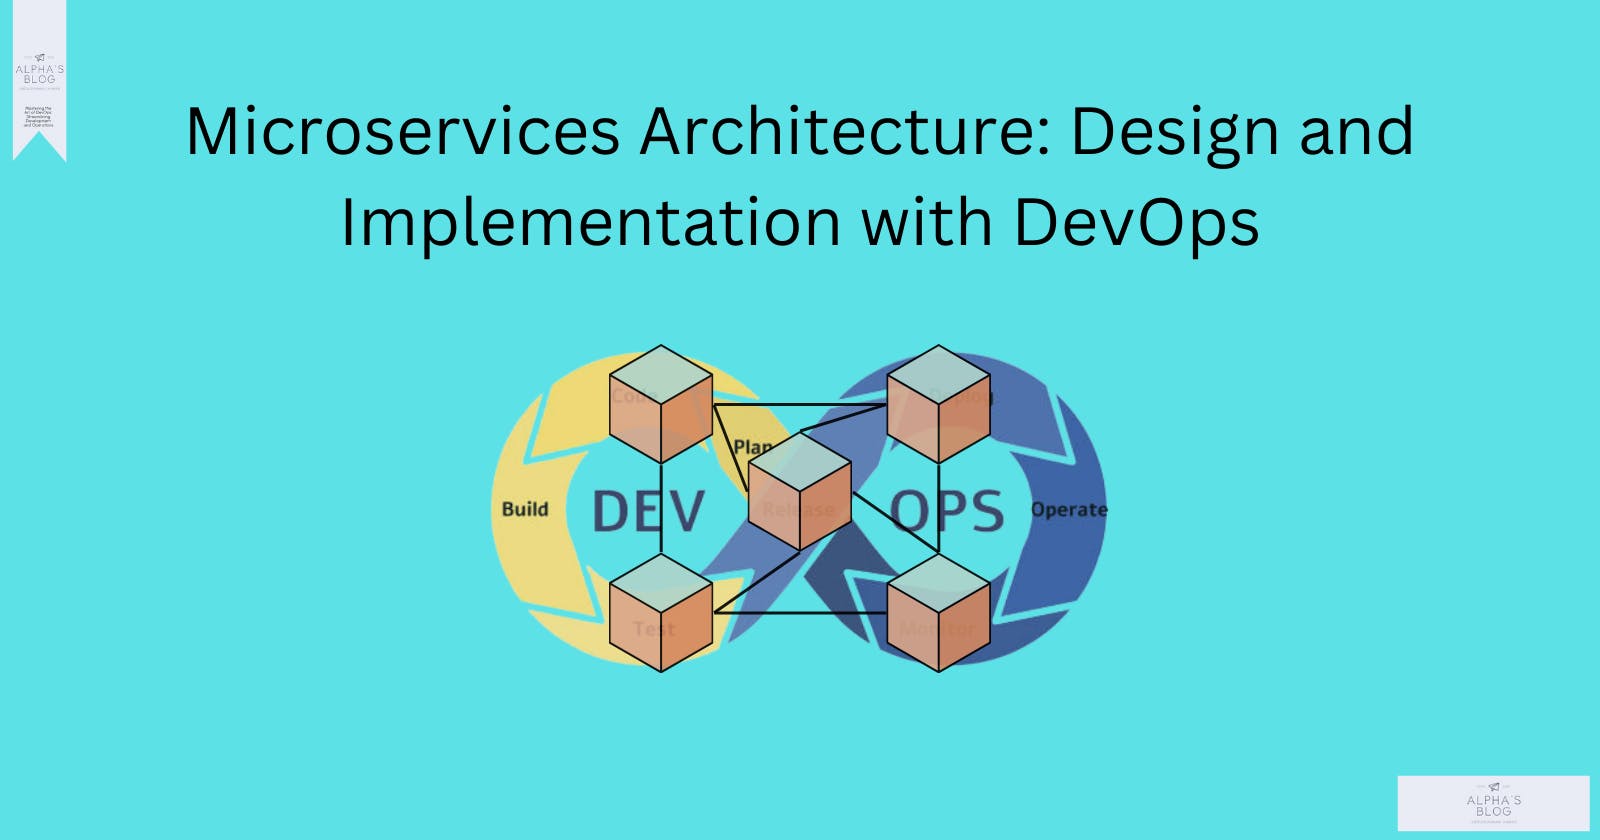 Microservices Architecture: Design and Implementation with DevOps